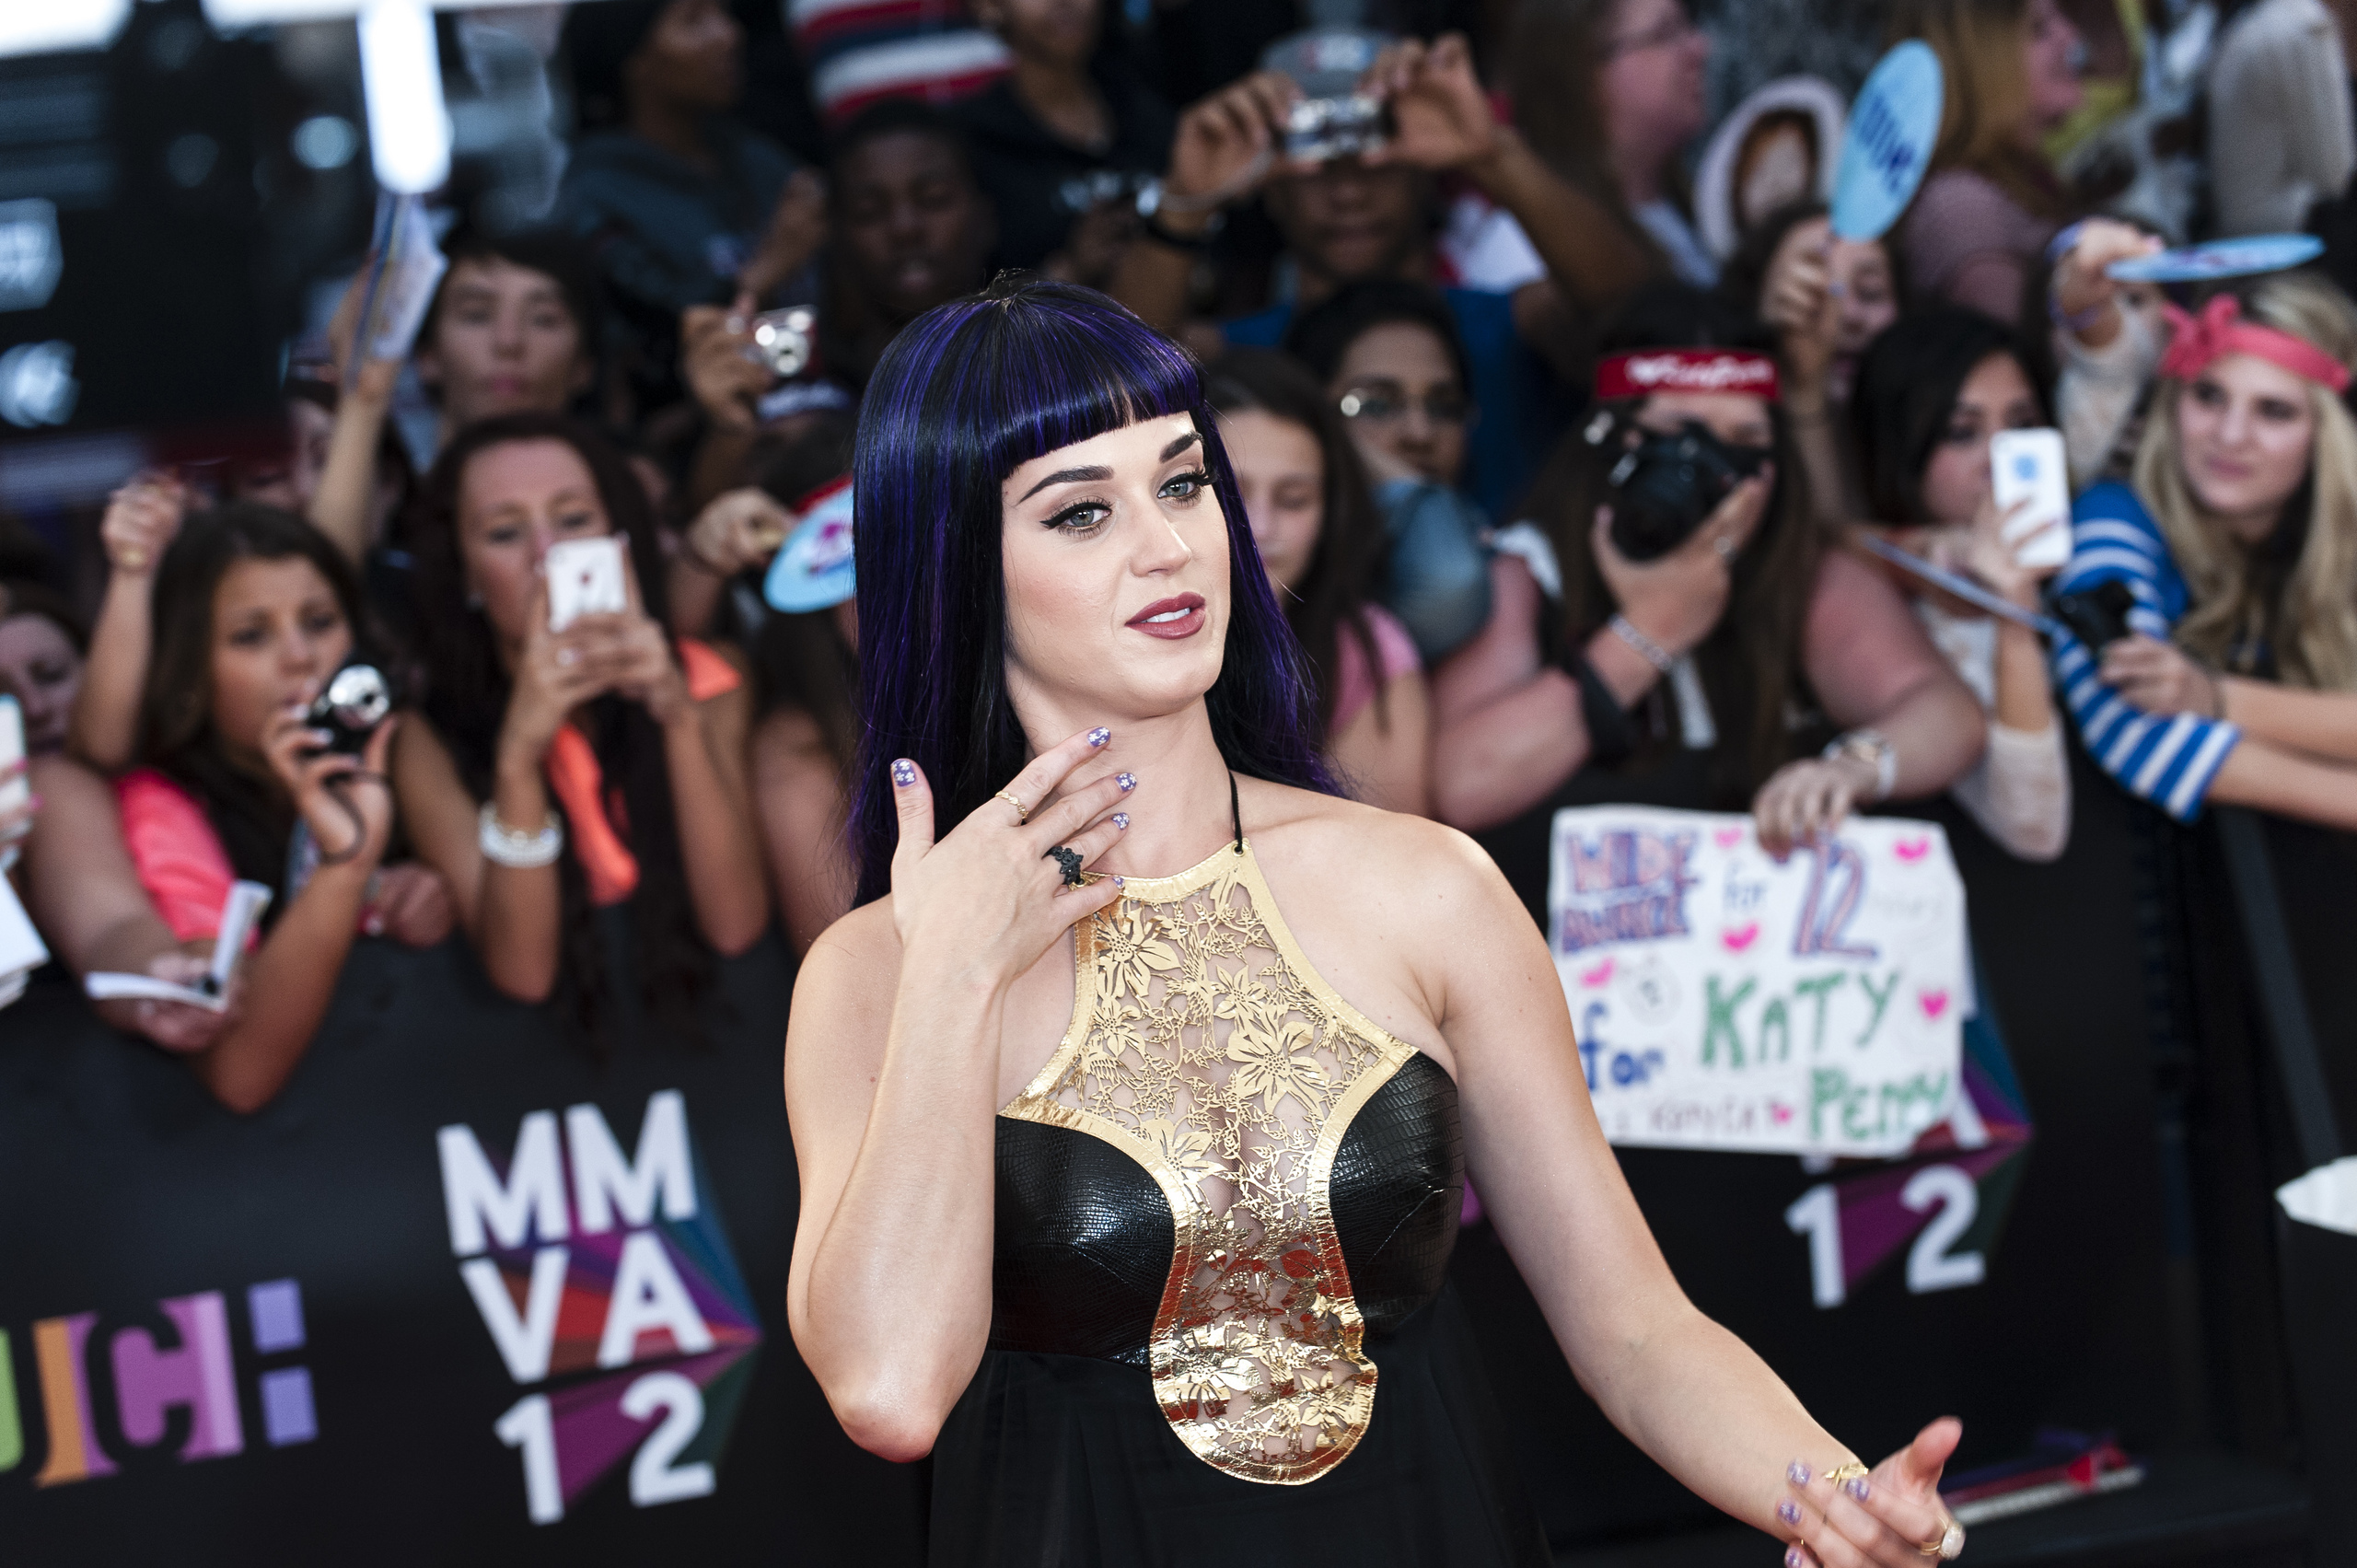 katy perry, images, image, wallpaper, photos, photo, photograph, gallery, k...